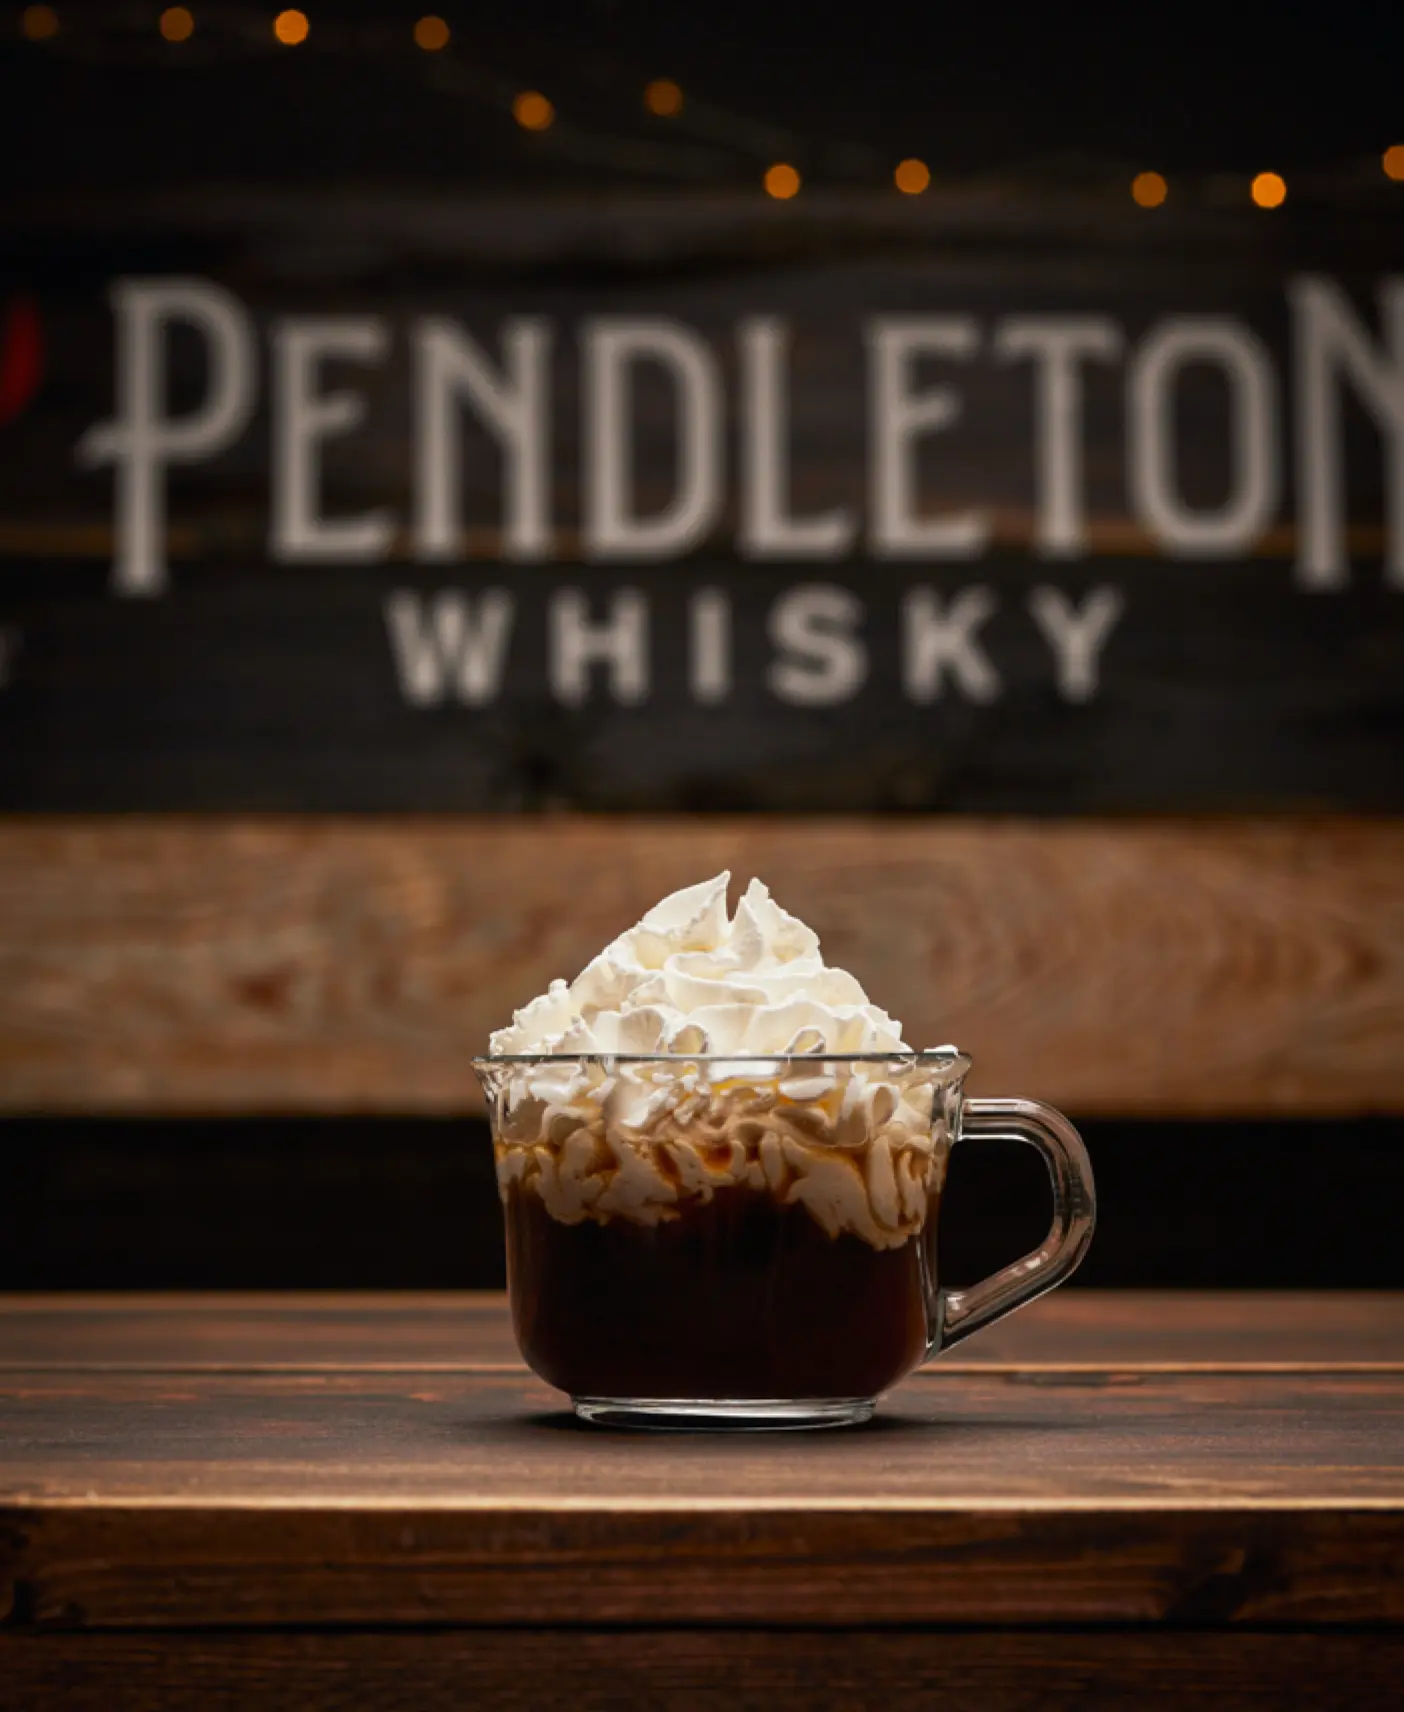 Cowboy Coffee Whiskey Cocktail made with Pendleton Original Whisky